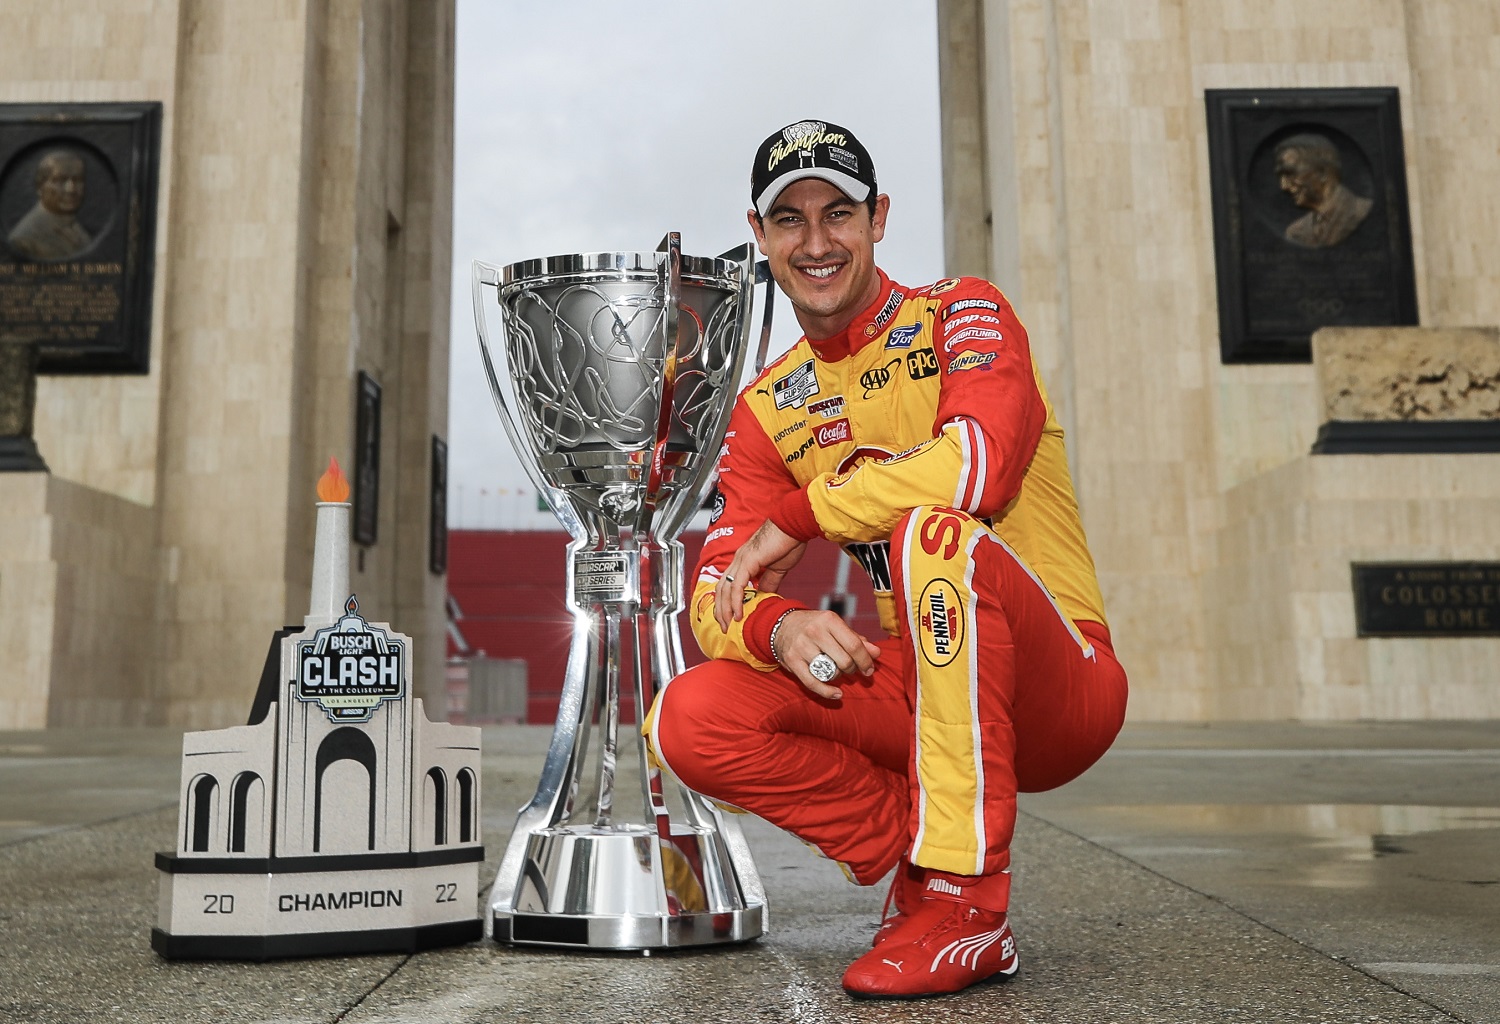 Joey Logano poses with the Bill France NASCAR Cup Series Championship trophy and his NASCAR Clash at the Coliseum trophy at LA Memorial Coliseum on Nov. 8, 2022.